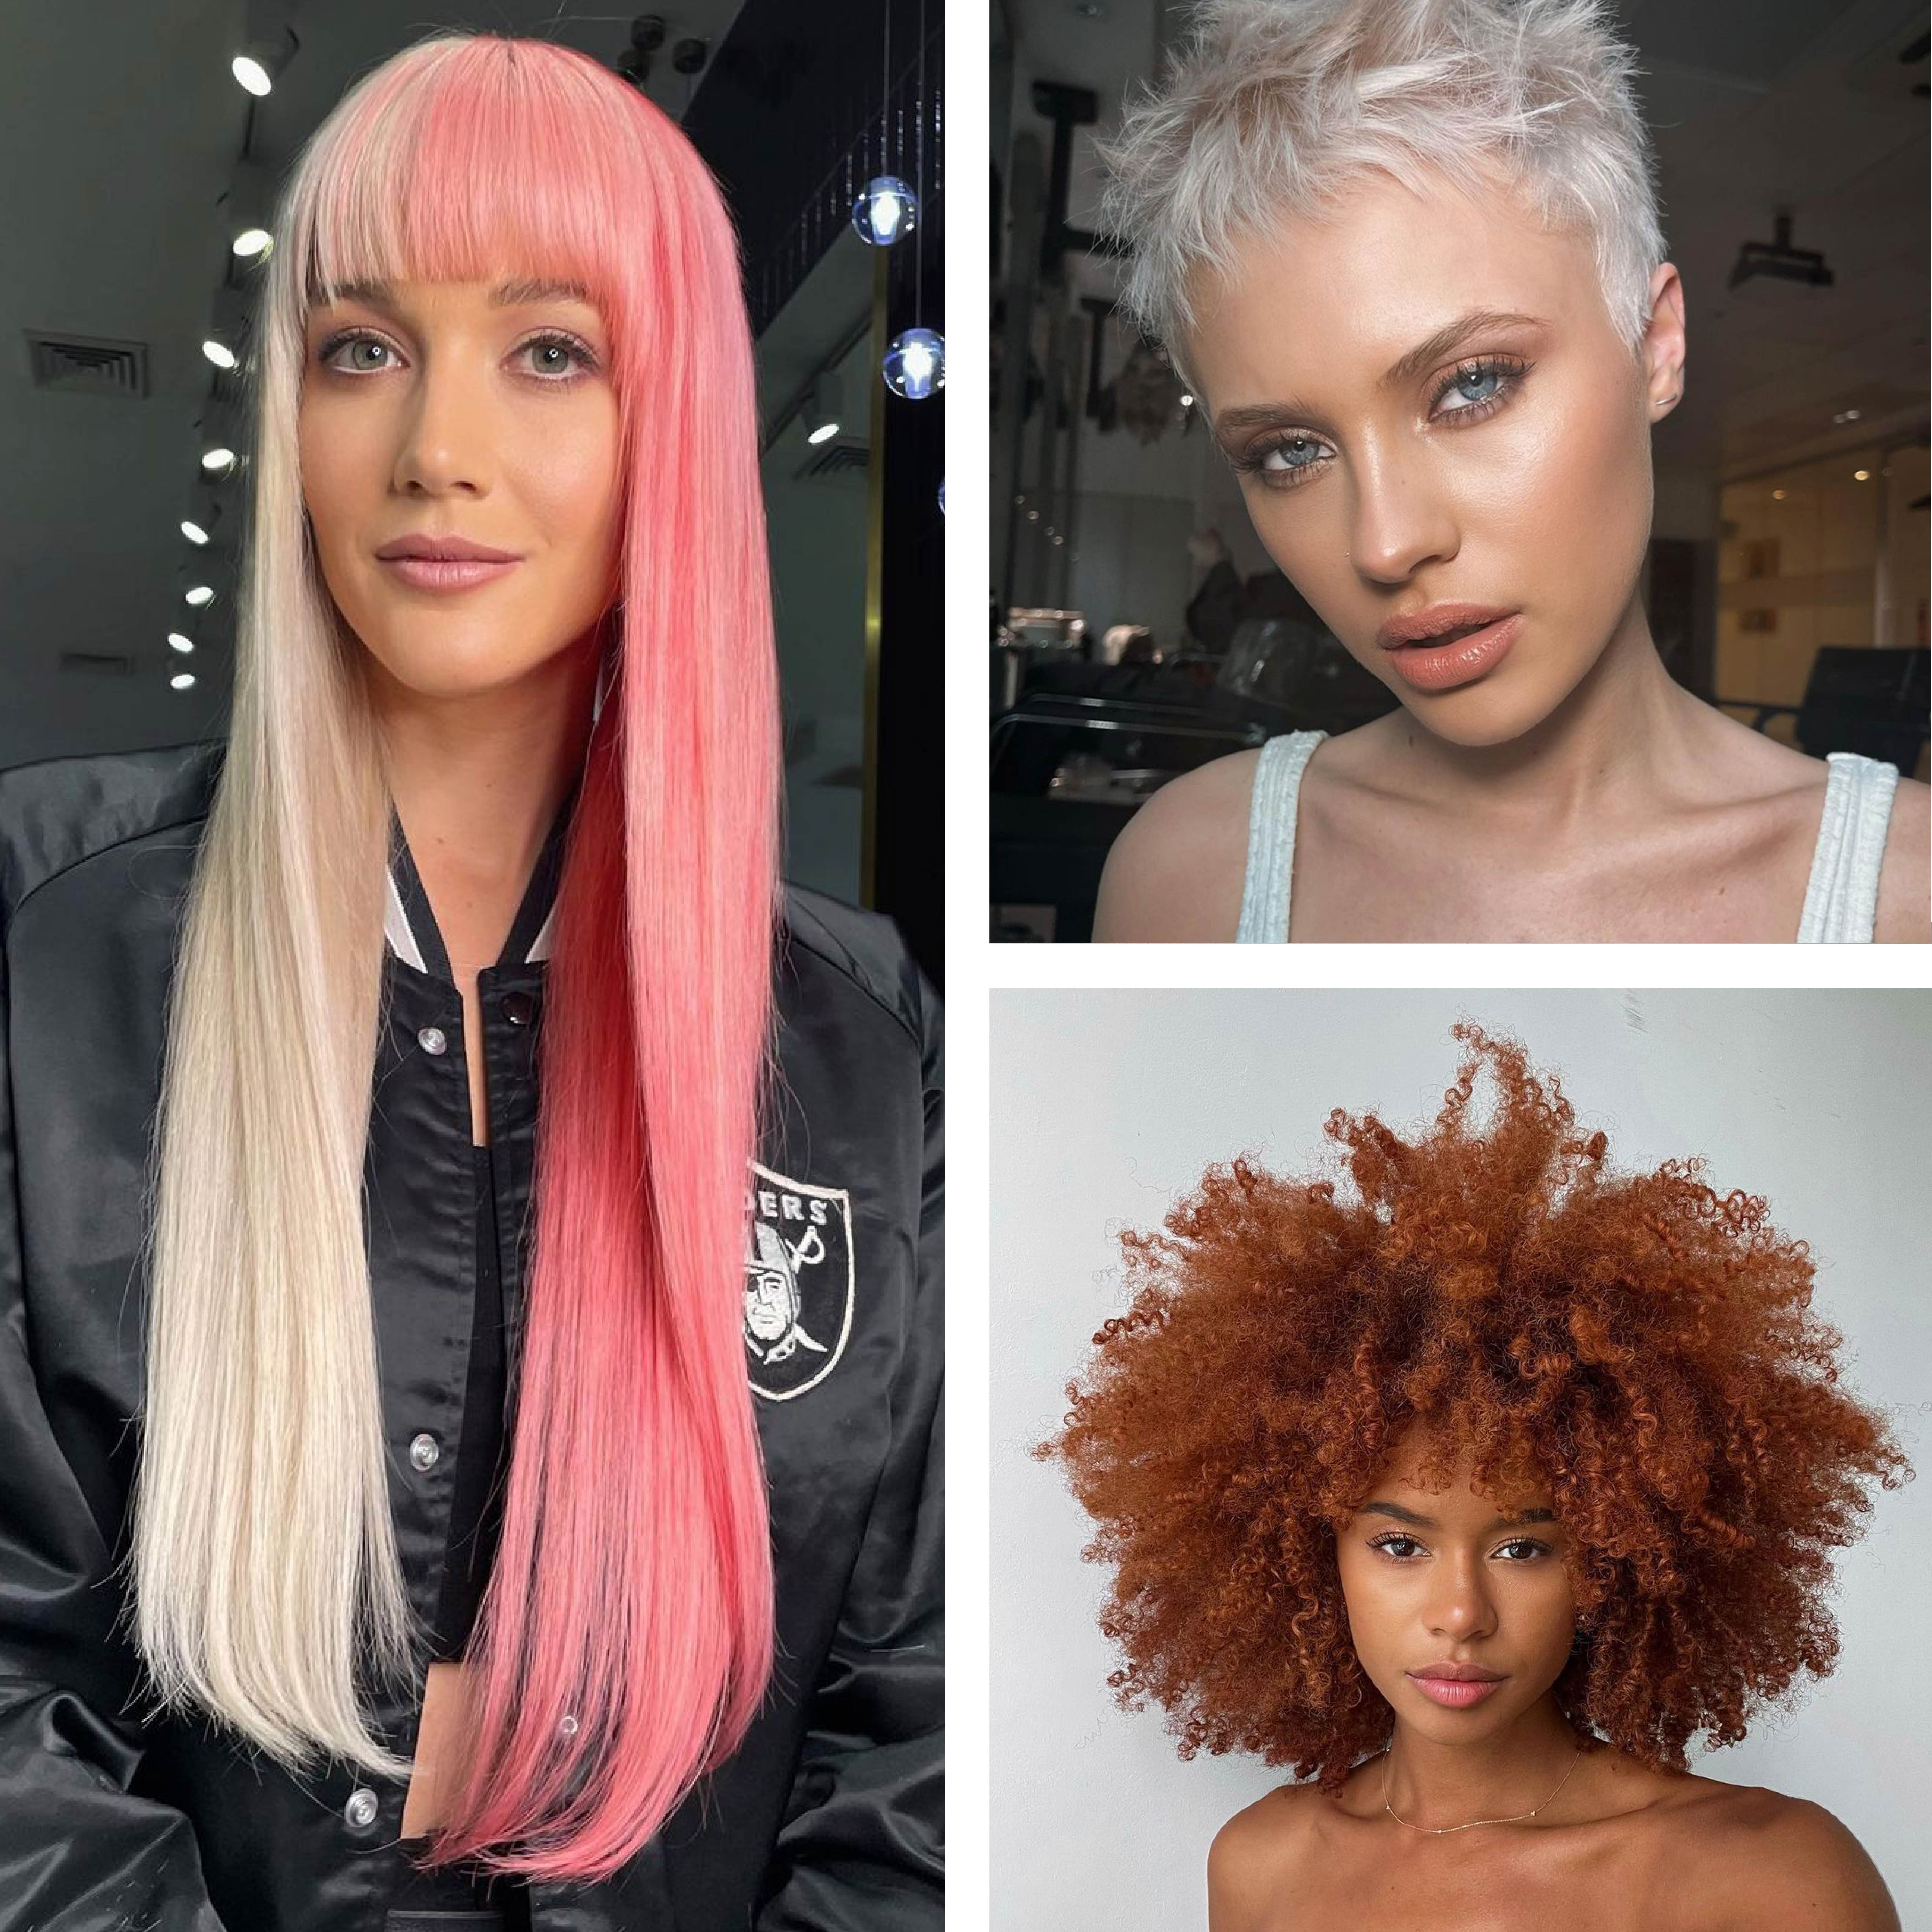 Pinterest Predicts These Hair Trends Will Rule 2023 - The Tease